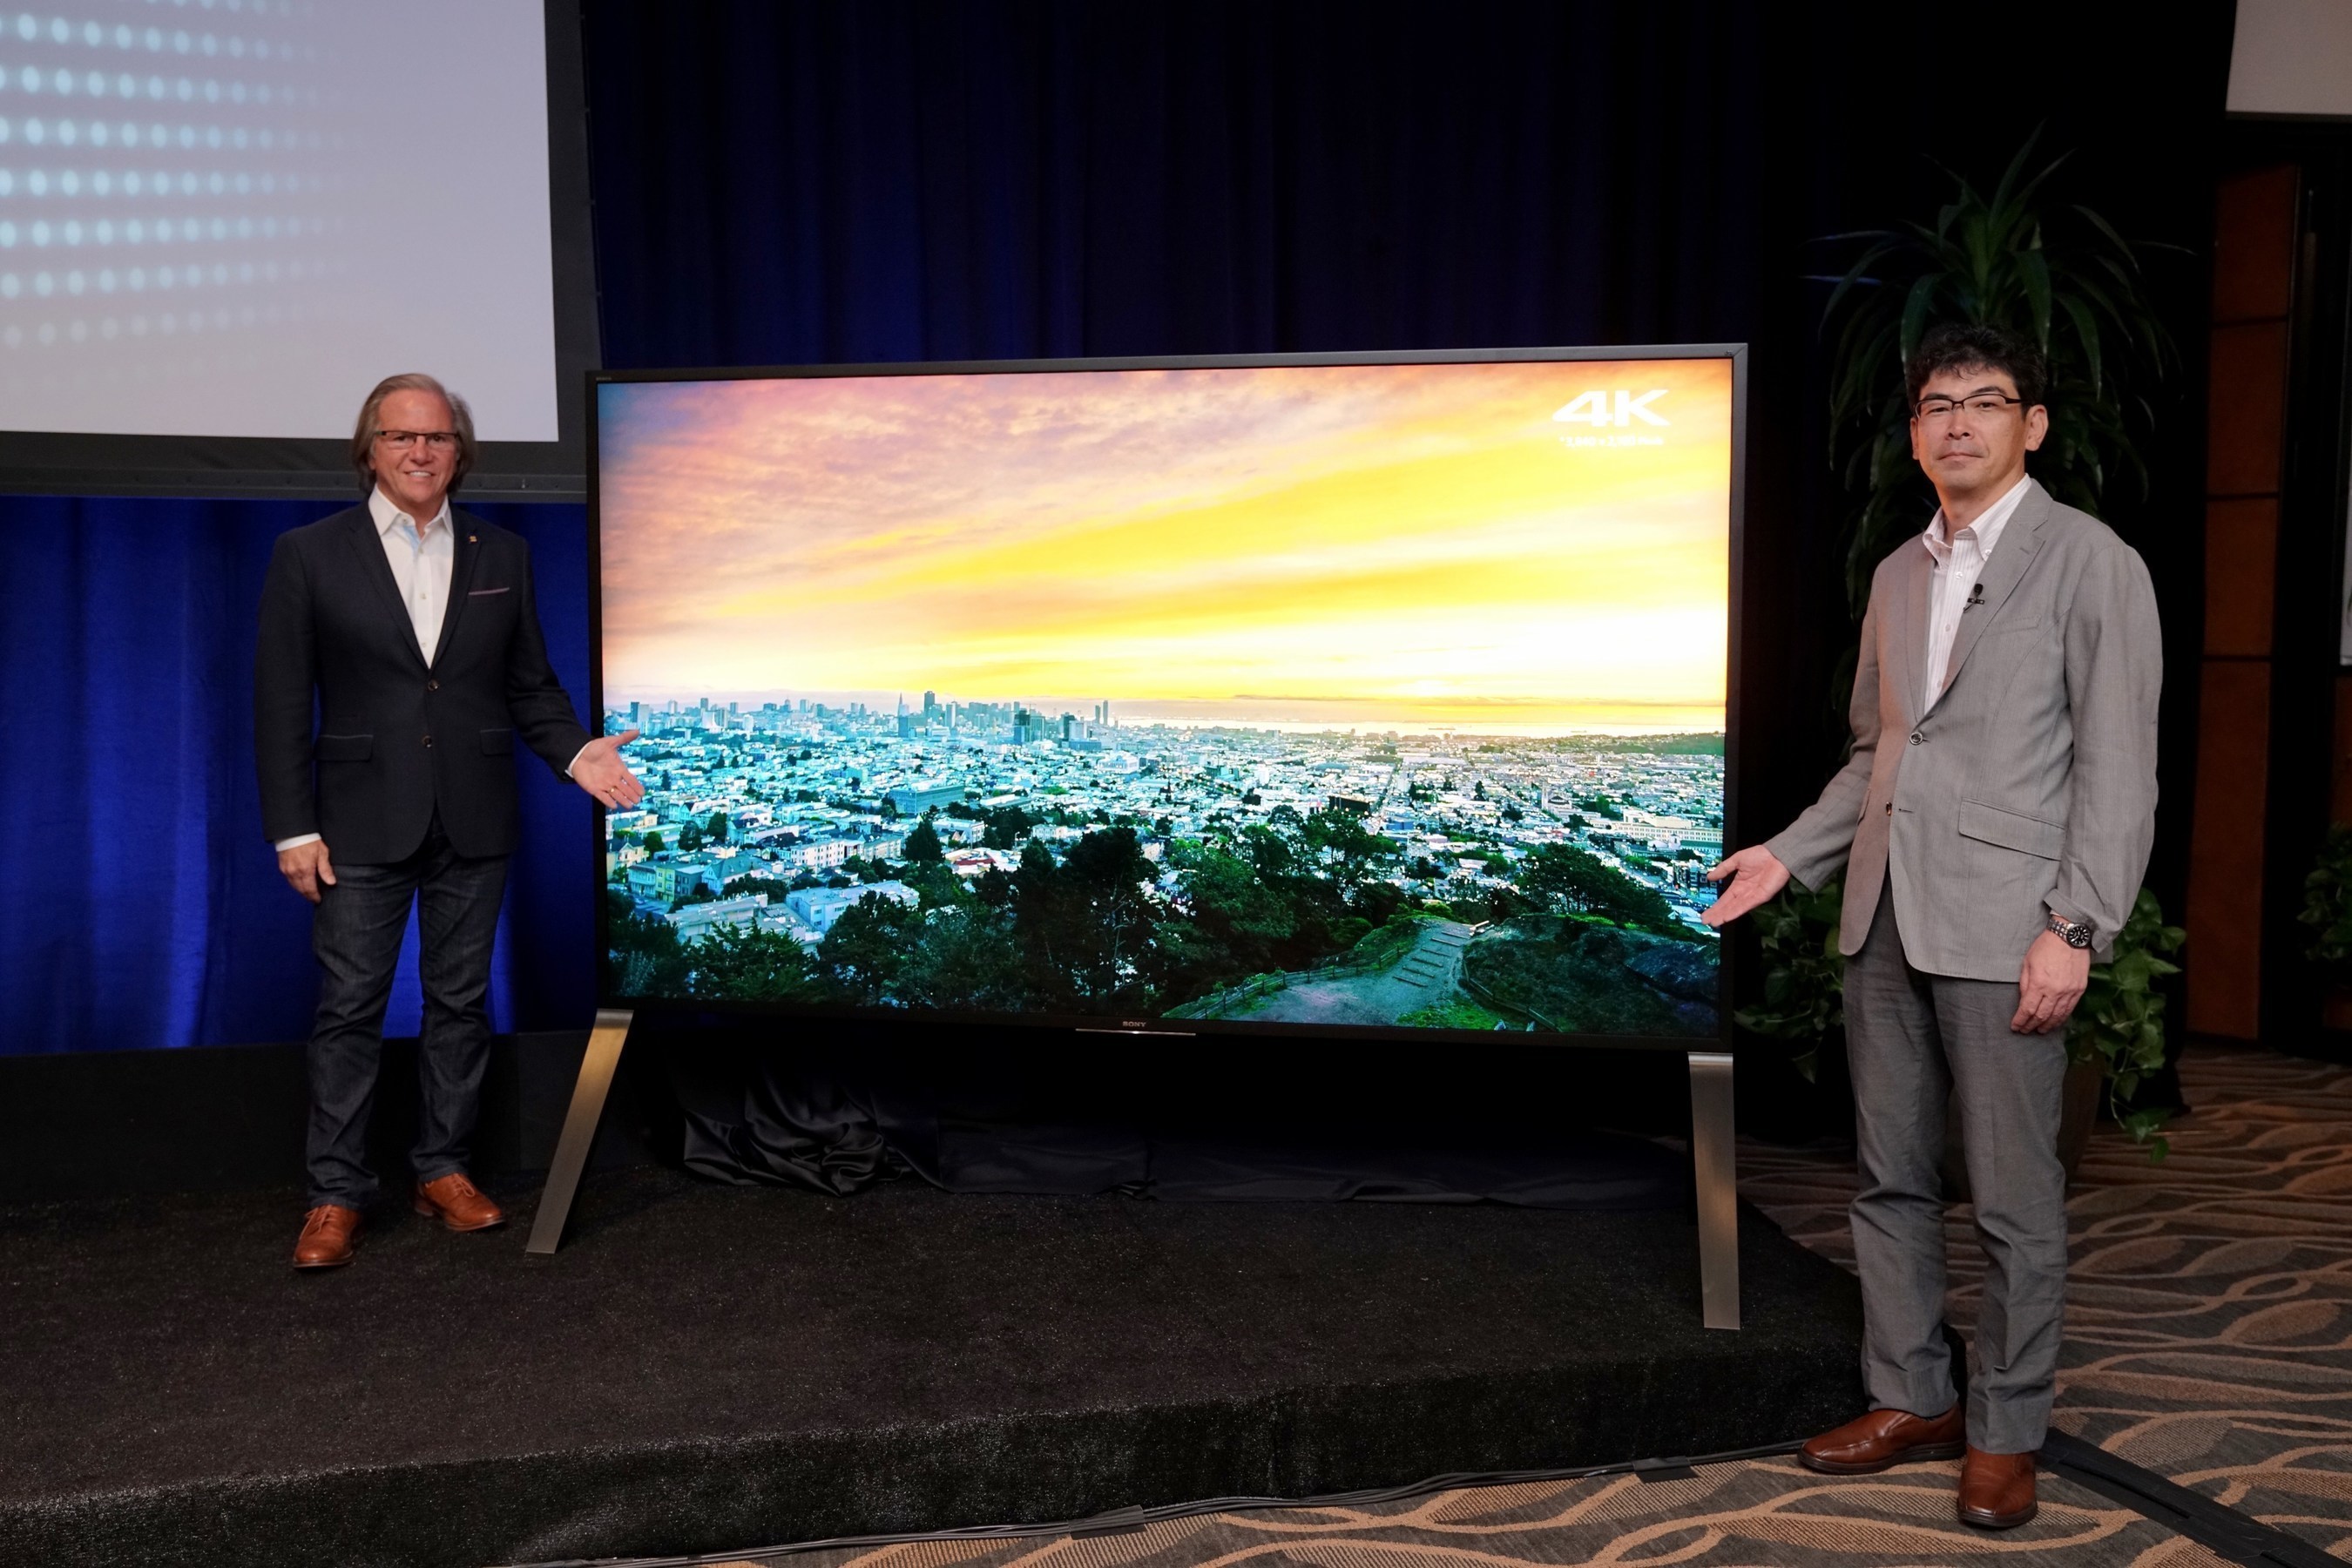 Mike Fasulo, President & COO, Sony Electronics USA and Kazuo Kii, Director & Deputy President, Sony Visual Products, stand with the new Z series TV announced today at an event at Sony Pictures Studios in Culver City, CA.